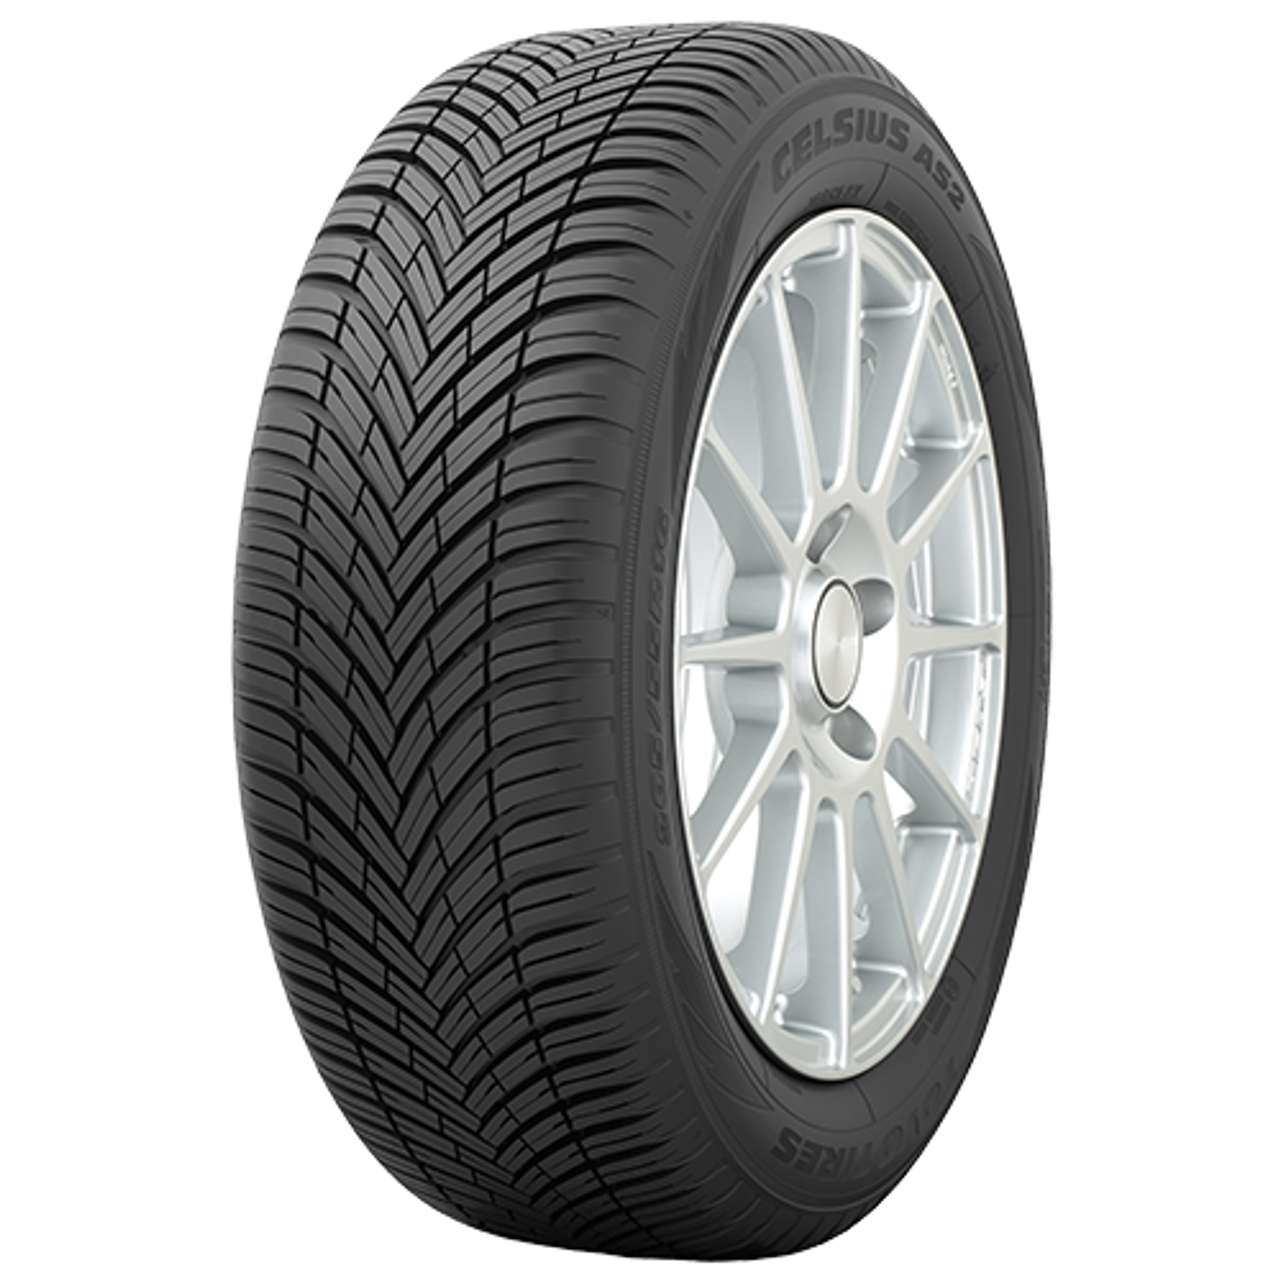 TOYO CELSIUS AS2 185/55R16 87V BSW